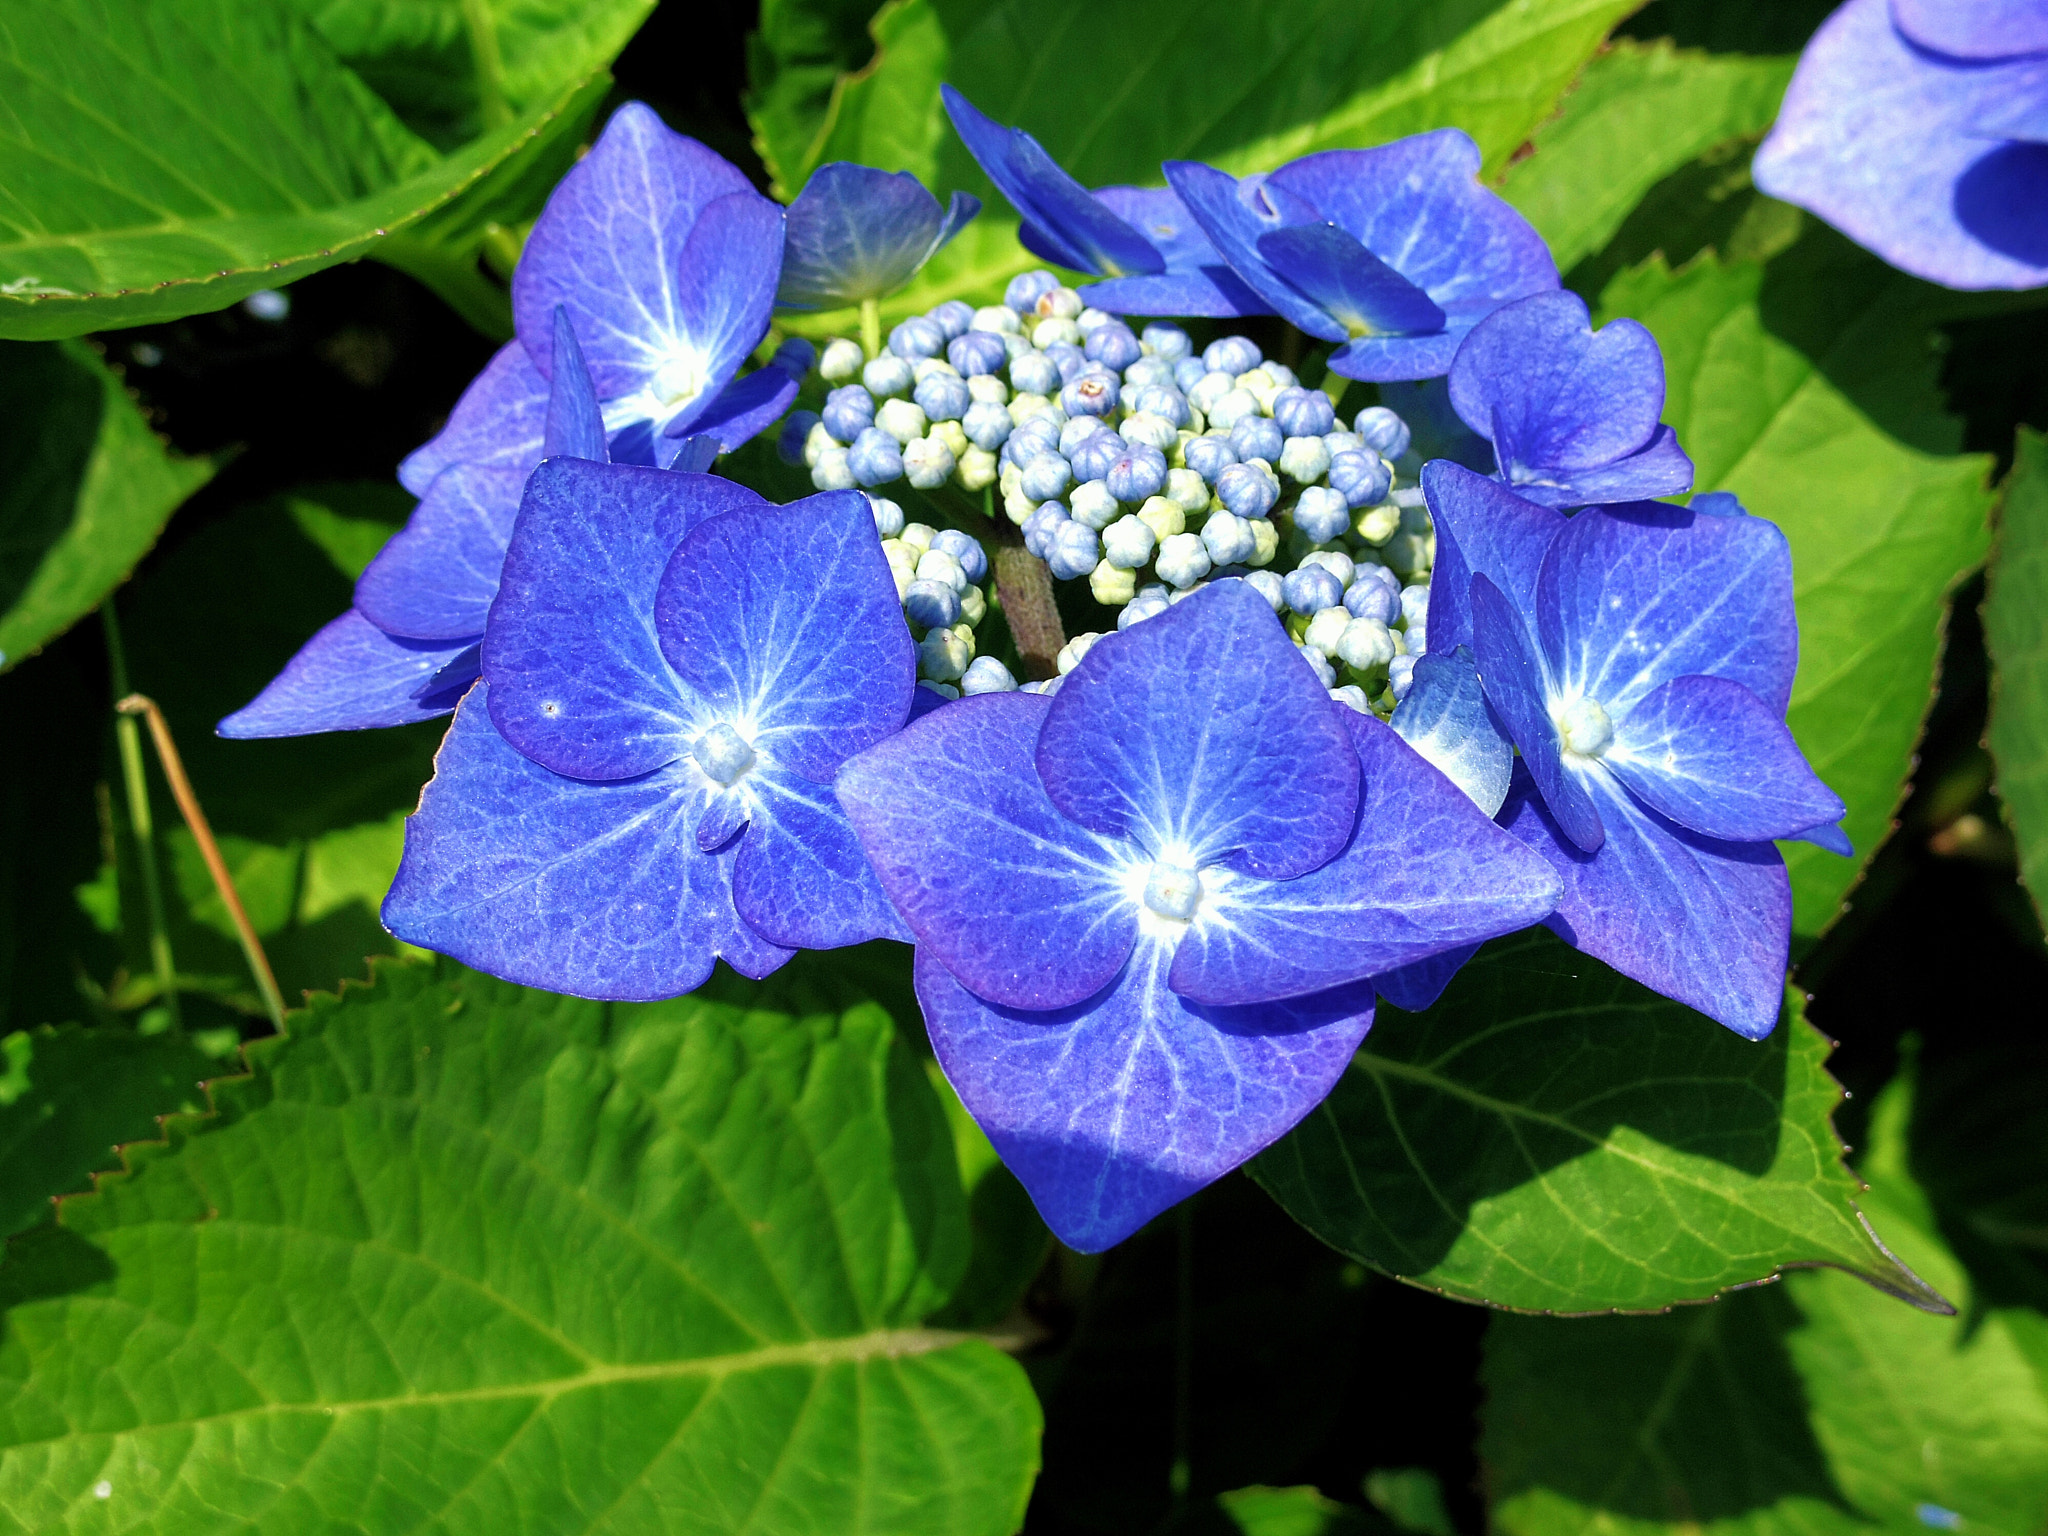 Pentax Q sample photo. Lace cap hydrangea flower. this deep blue is most unusual. photography